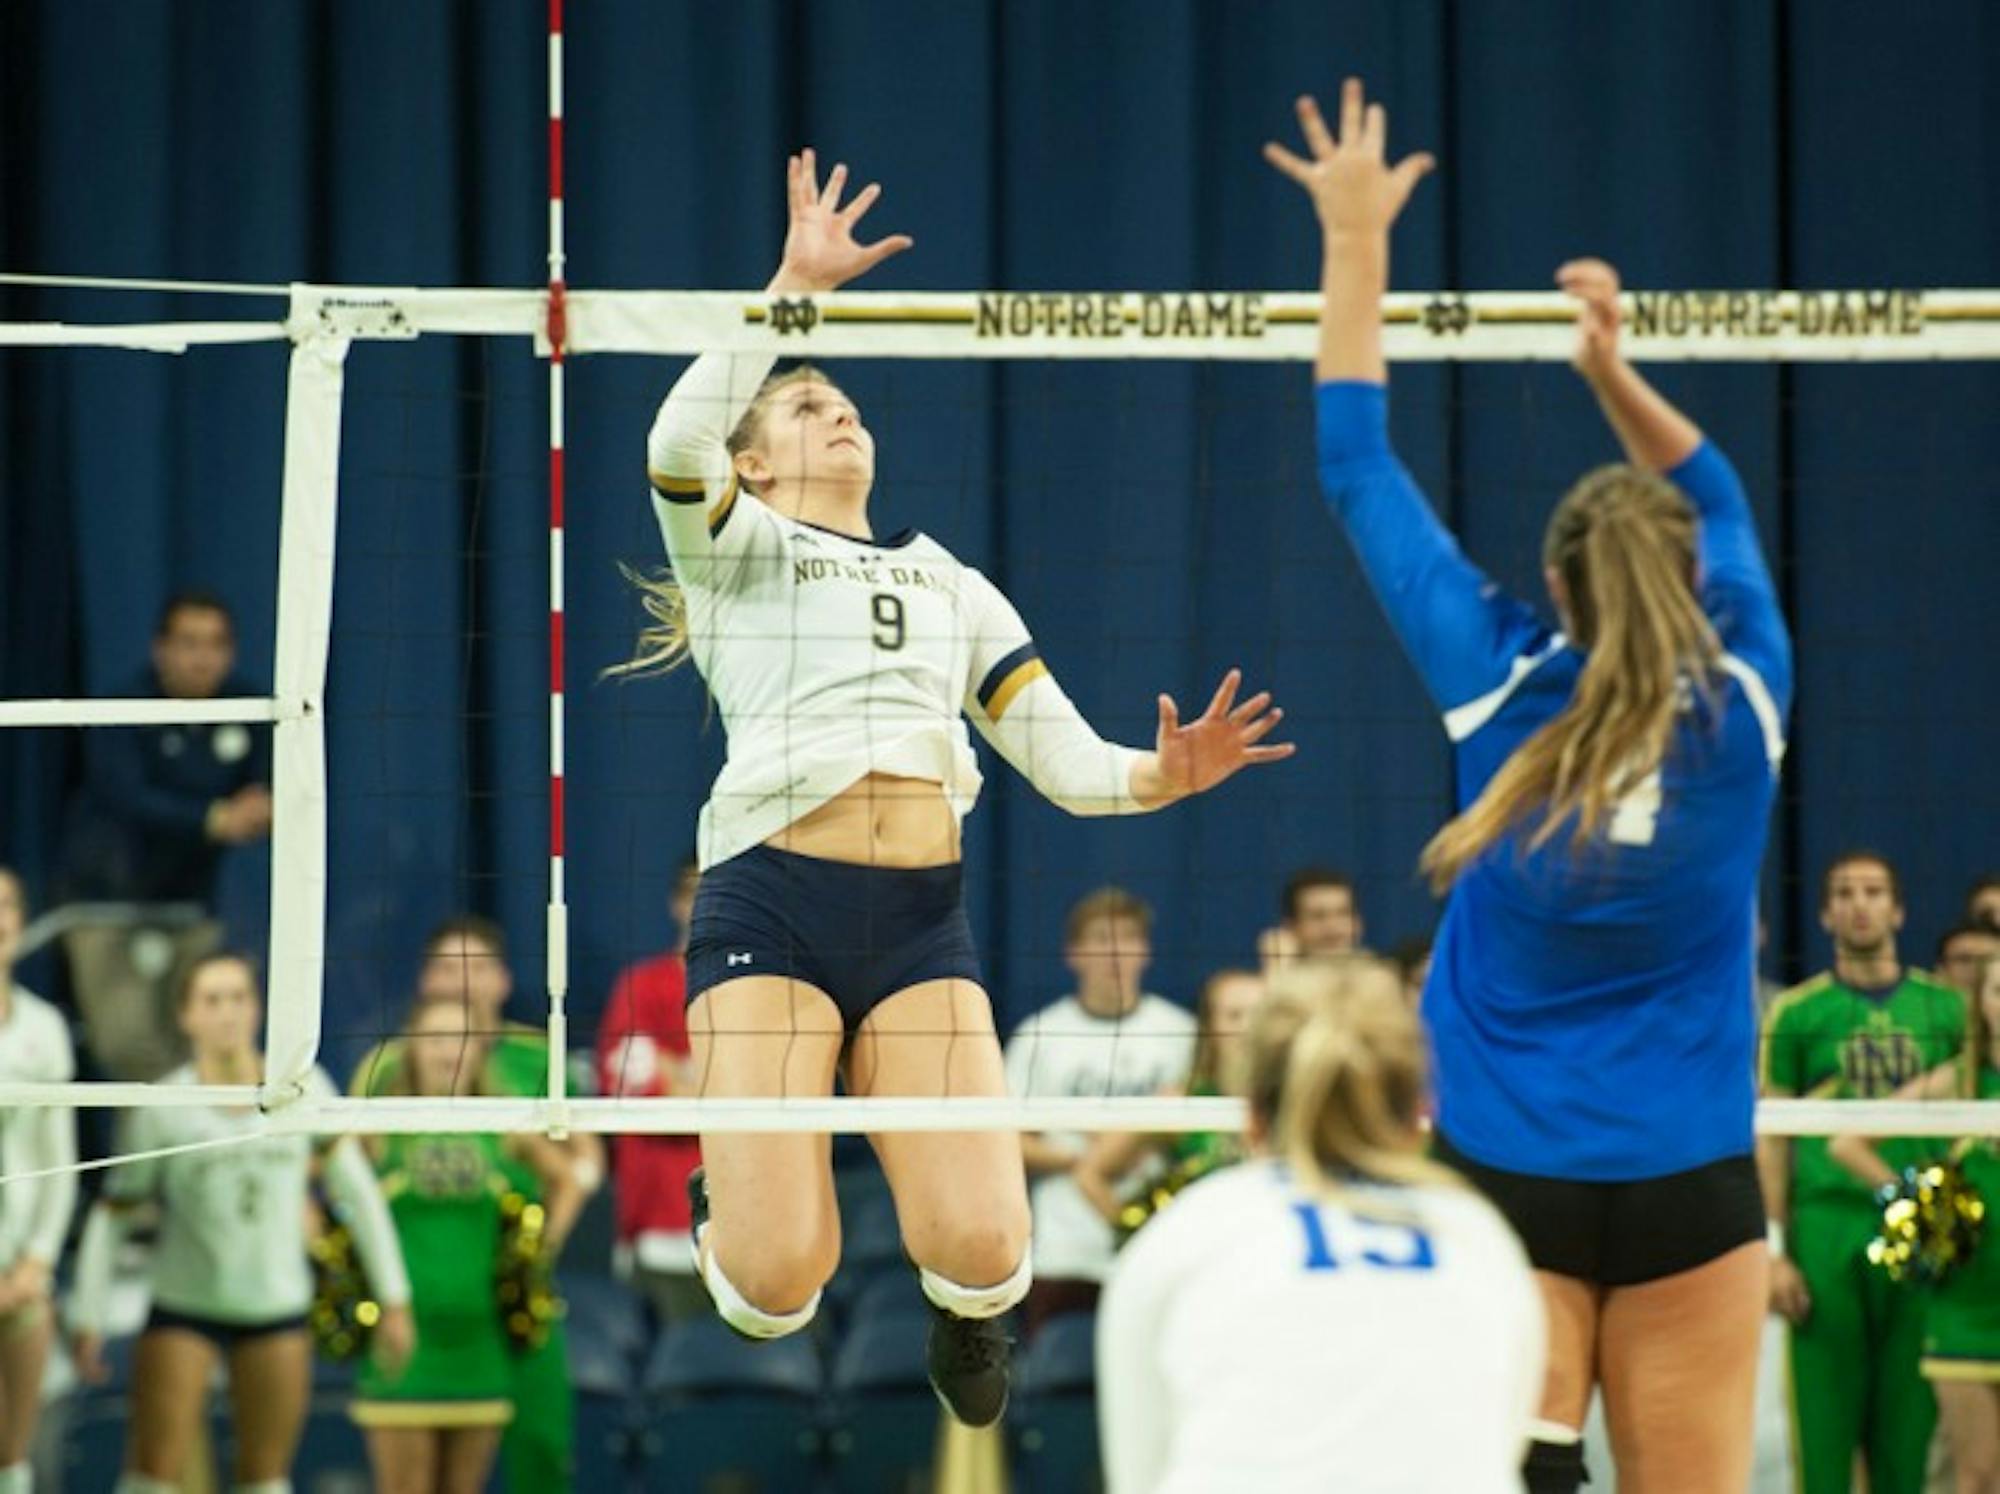 Irish sophomore outside hitter Rebecca Nunge looks to tip the ball during Notre Dame’s 3-1 win over Duke on Sept. 30 at Purcell Pavilion.